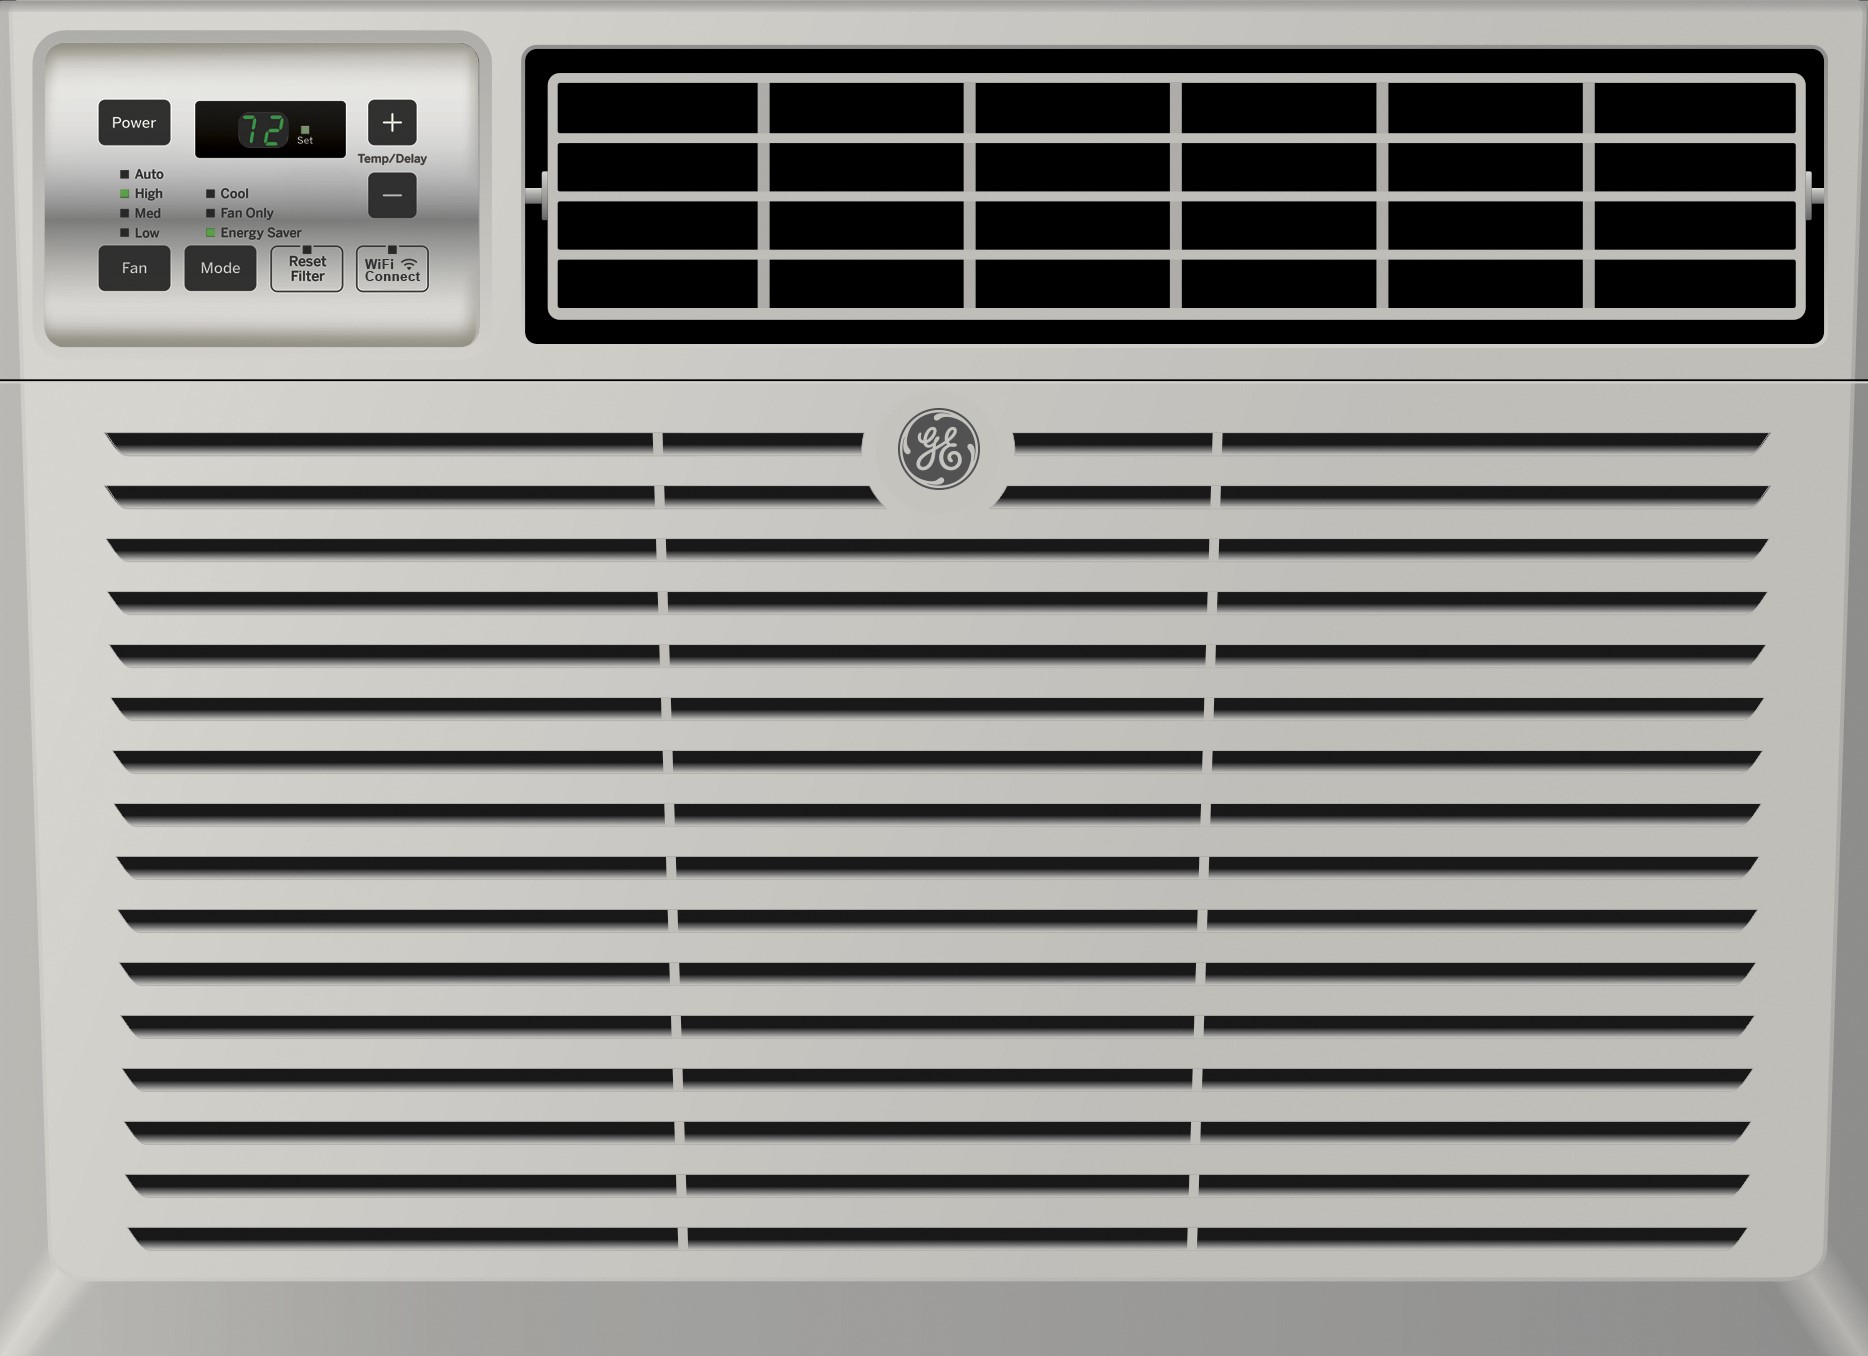 What Is E8 Code On GE Air Conditioner